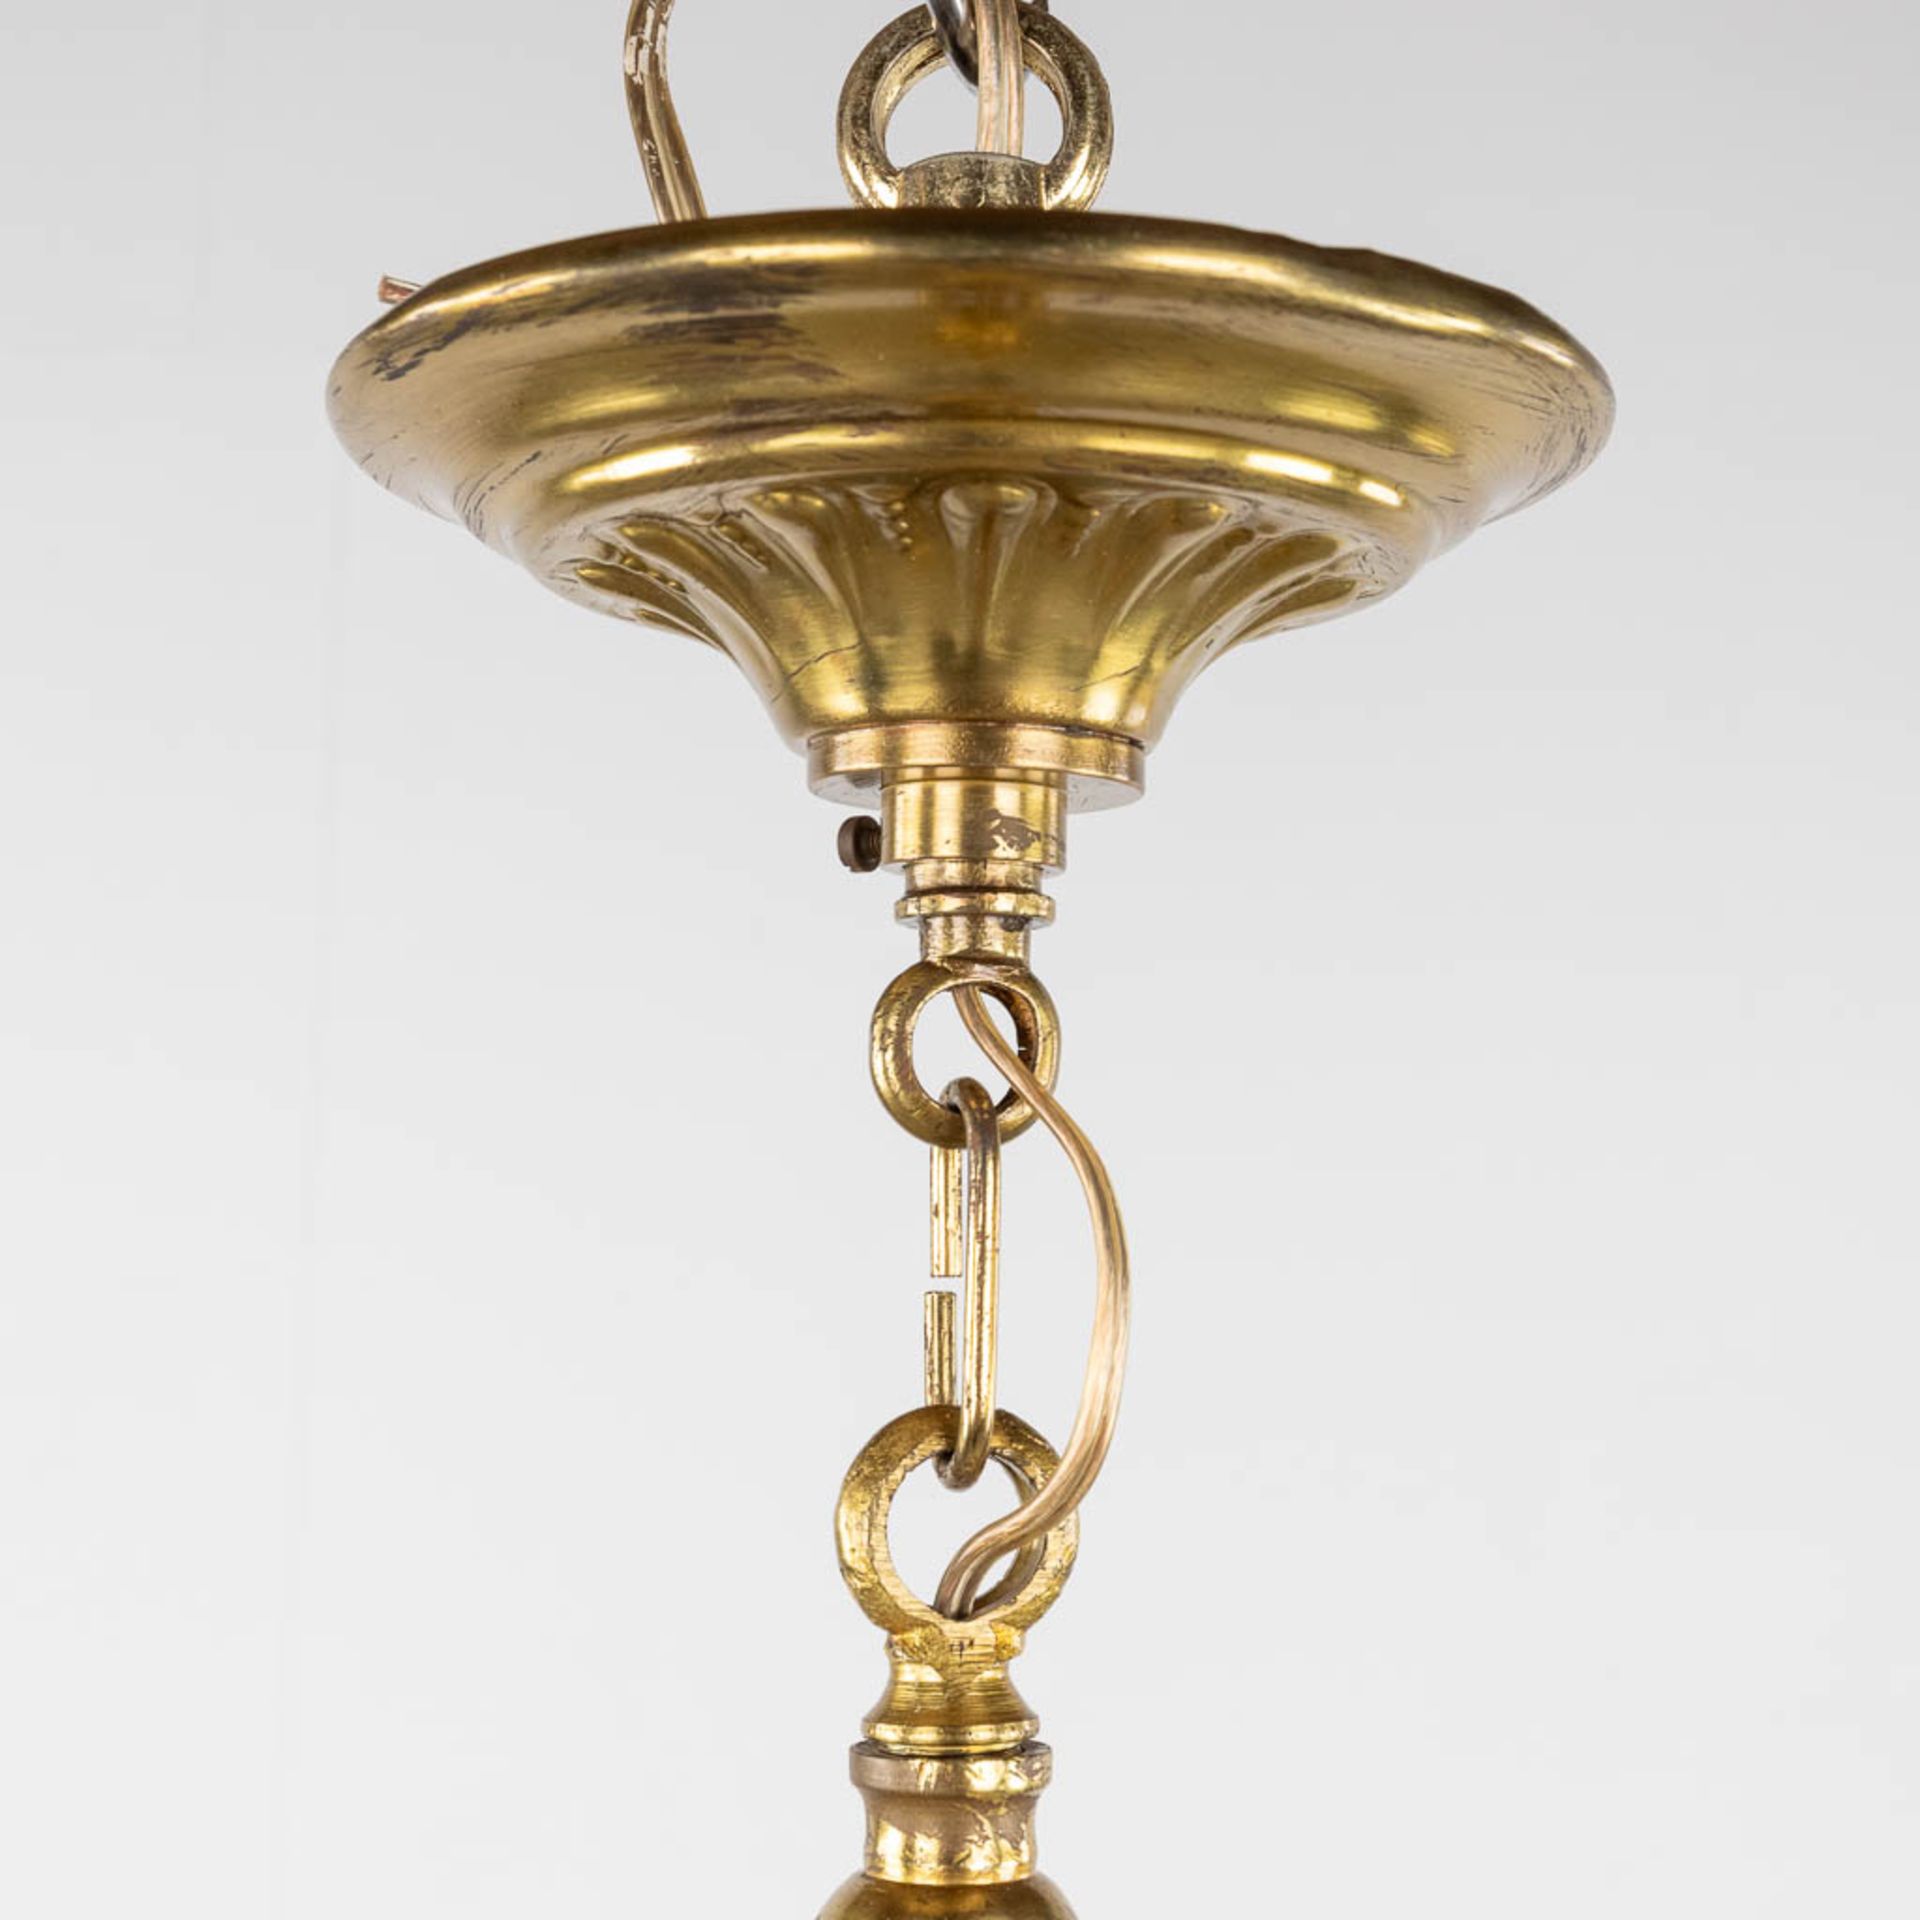 A chandelier, bronze finished with ram's heads, Louis XVI style. (H:93 x D:66 cm) - Image 4 of 13